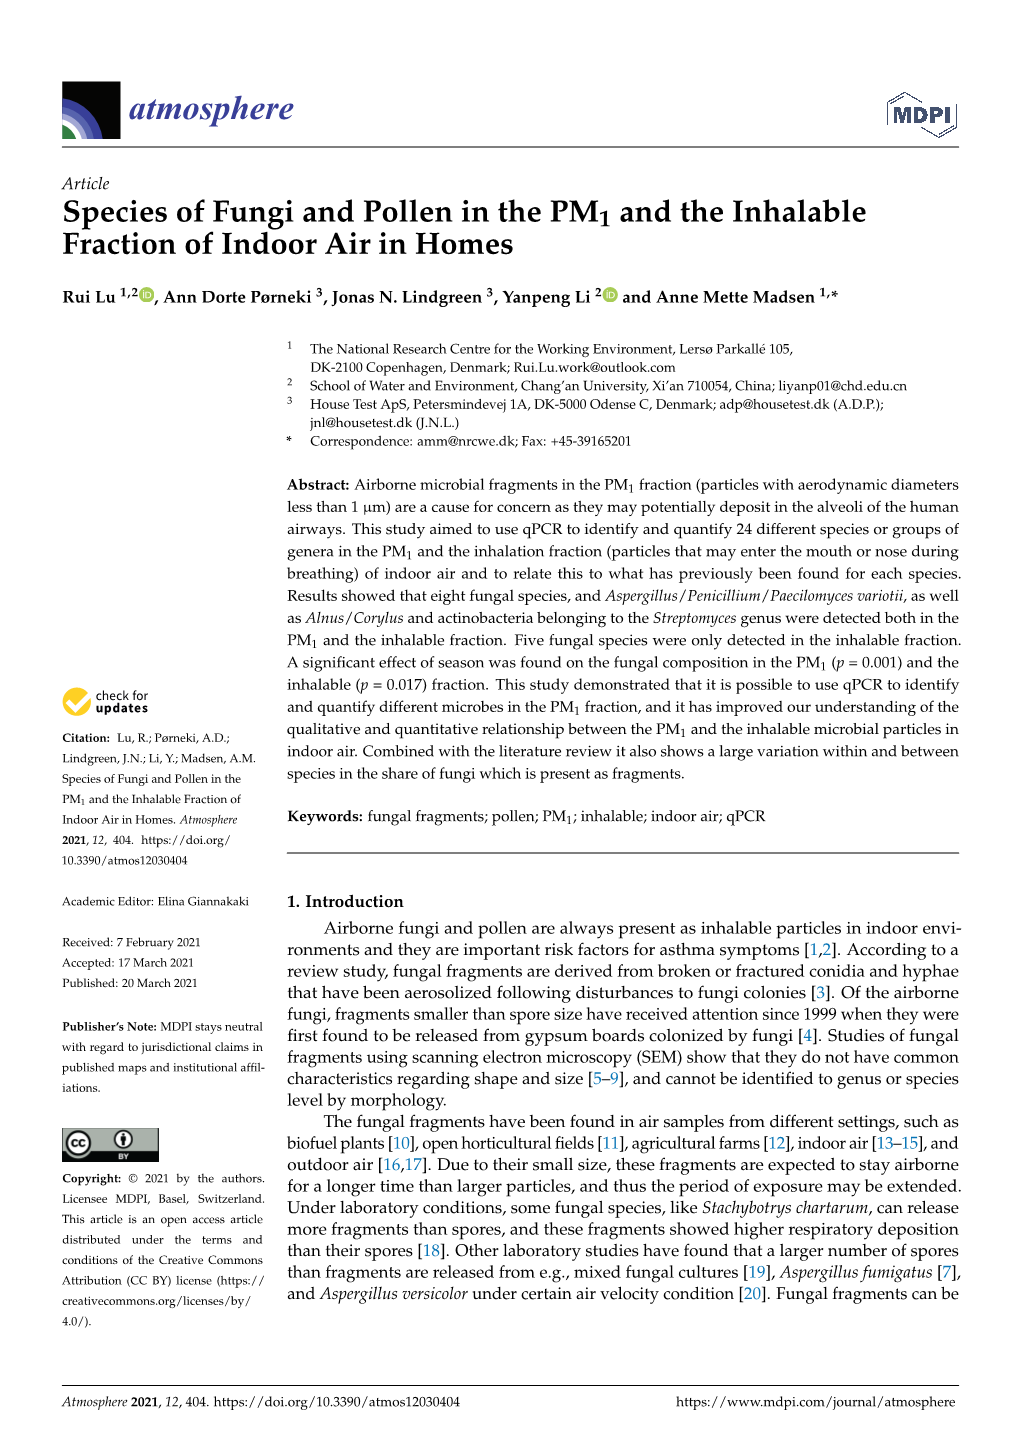 Species of Fungi and Pollen in the PM1 and the Inhalable Fraction of Indoor Air in Homes